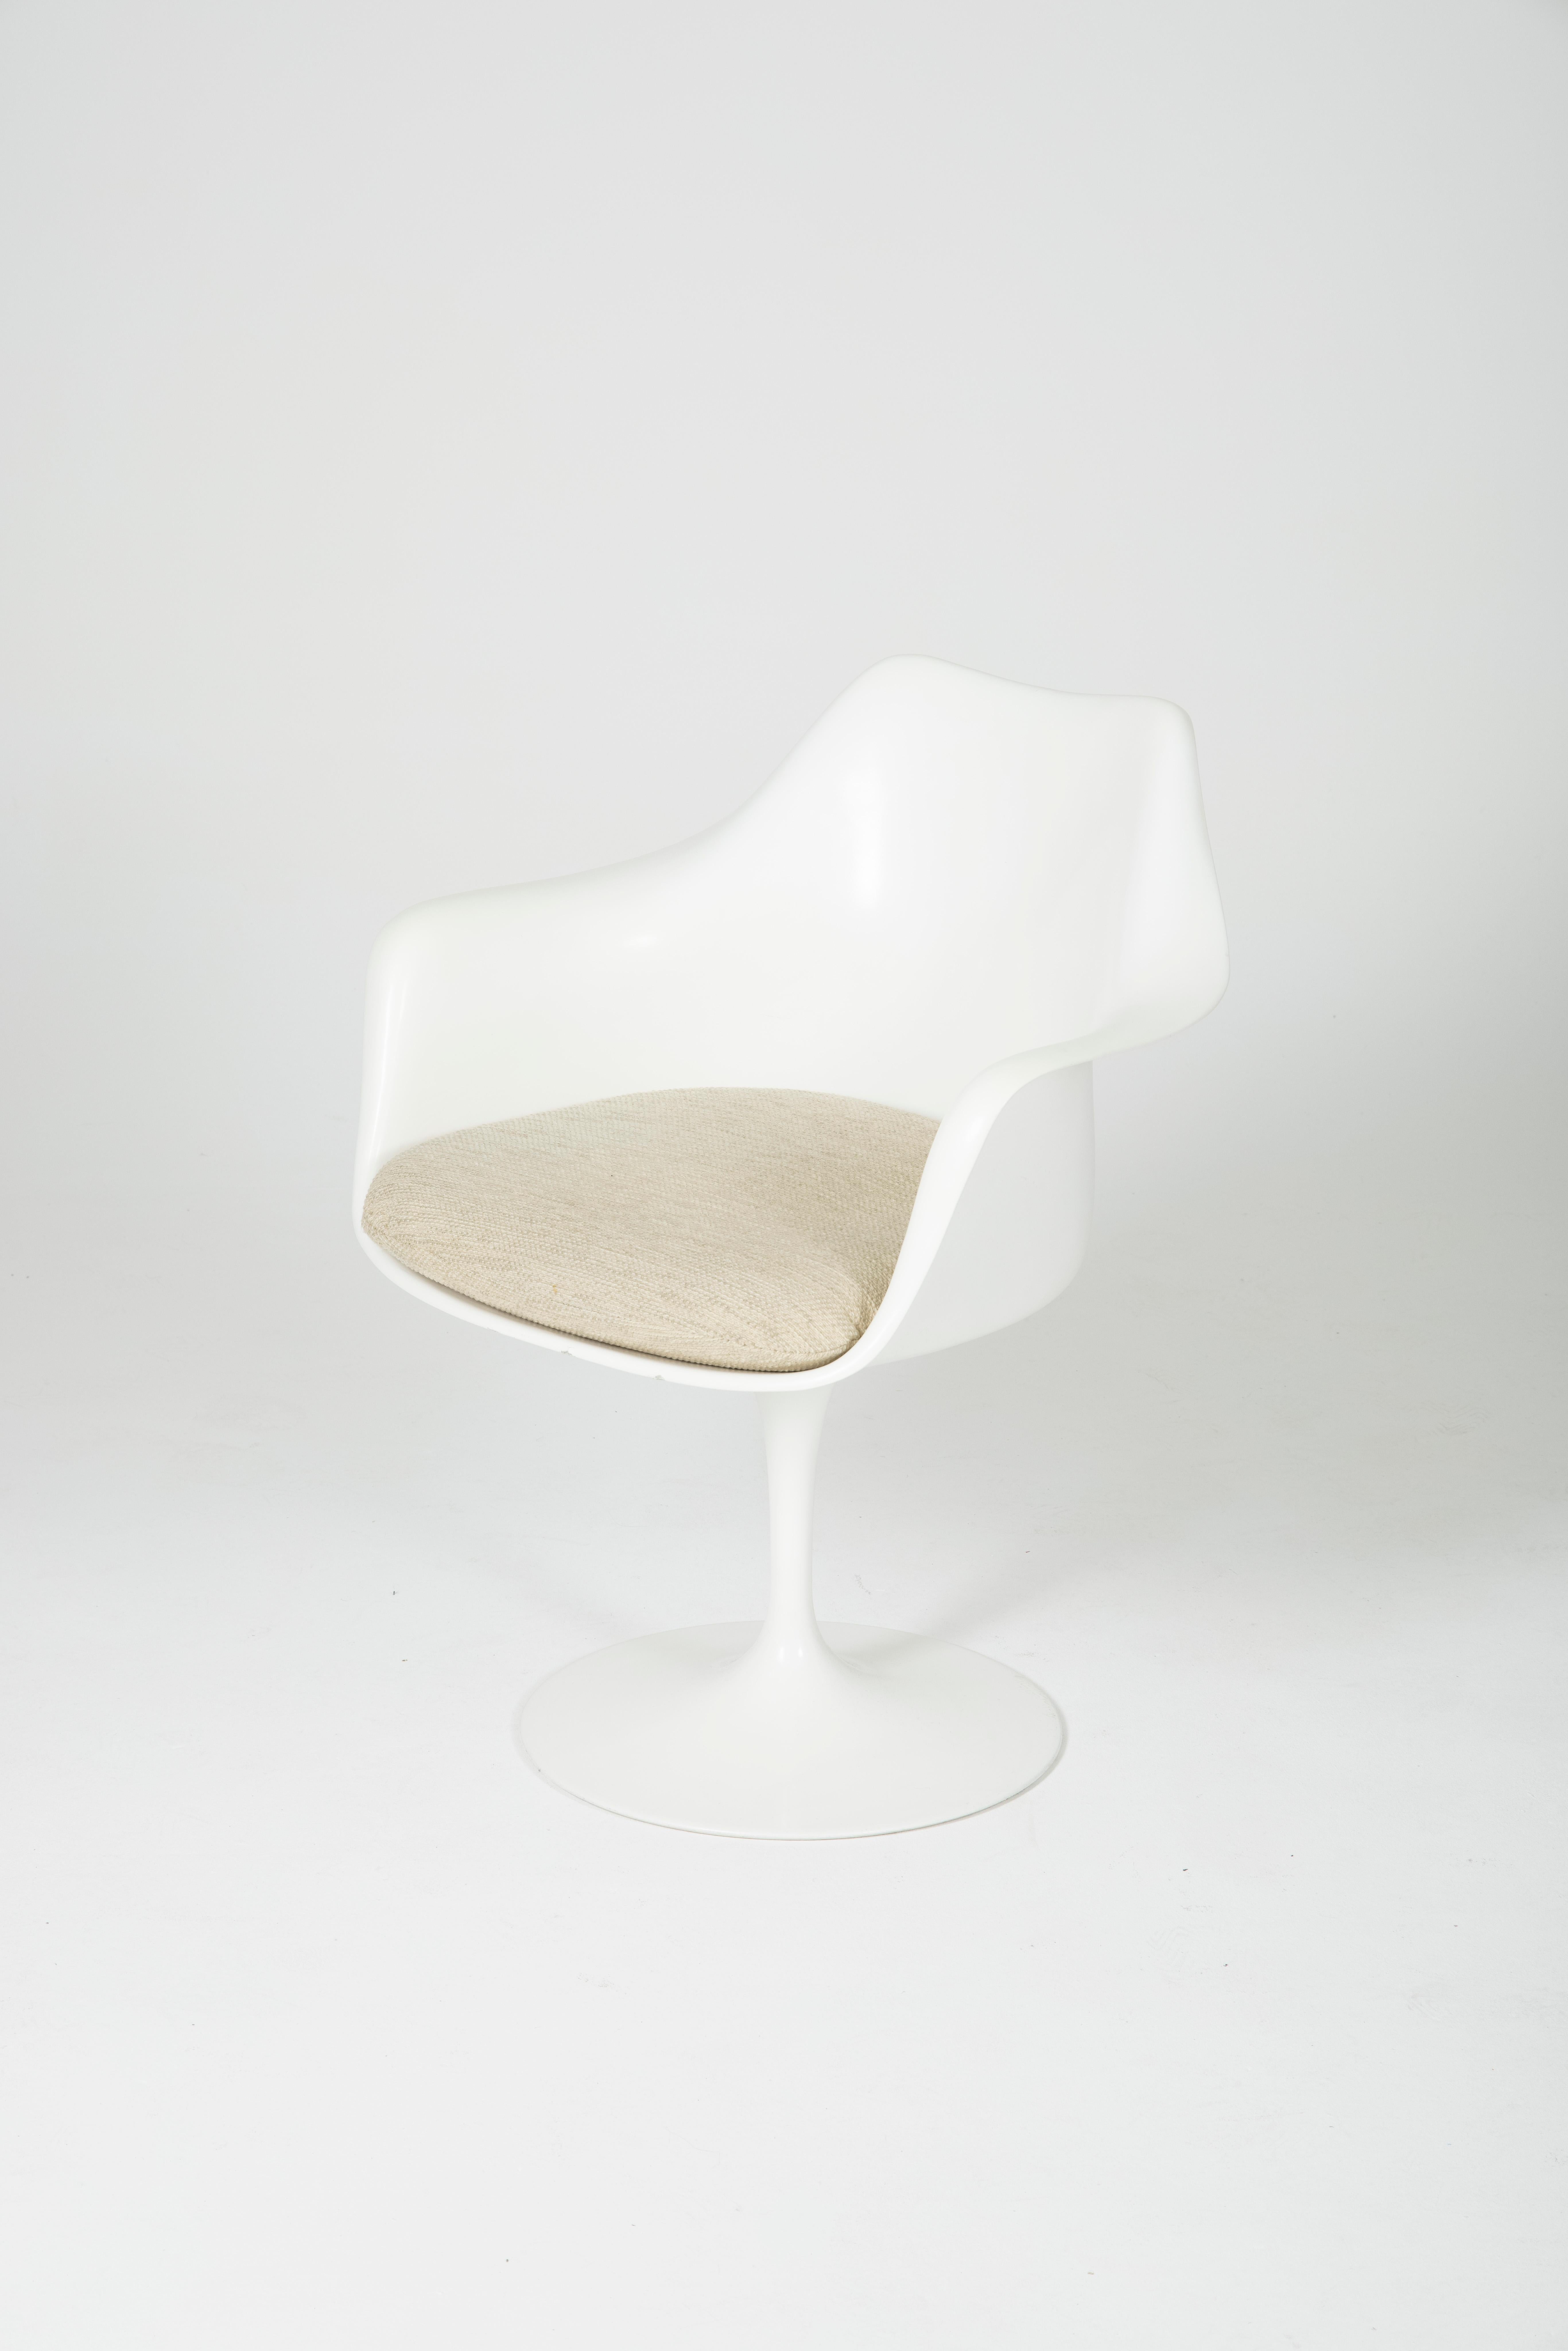 Tulip armchair by Eero Saarinen for Knoll International. Molded fiberglass shell and cast aluminum base. Reupholstered in our workshop. Its organic shape remains timeless and elegant. Very good condition.